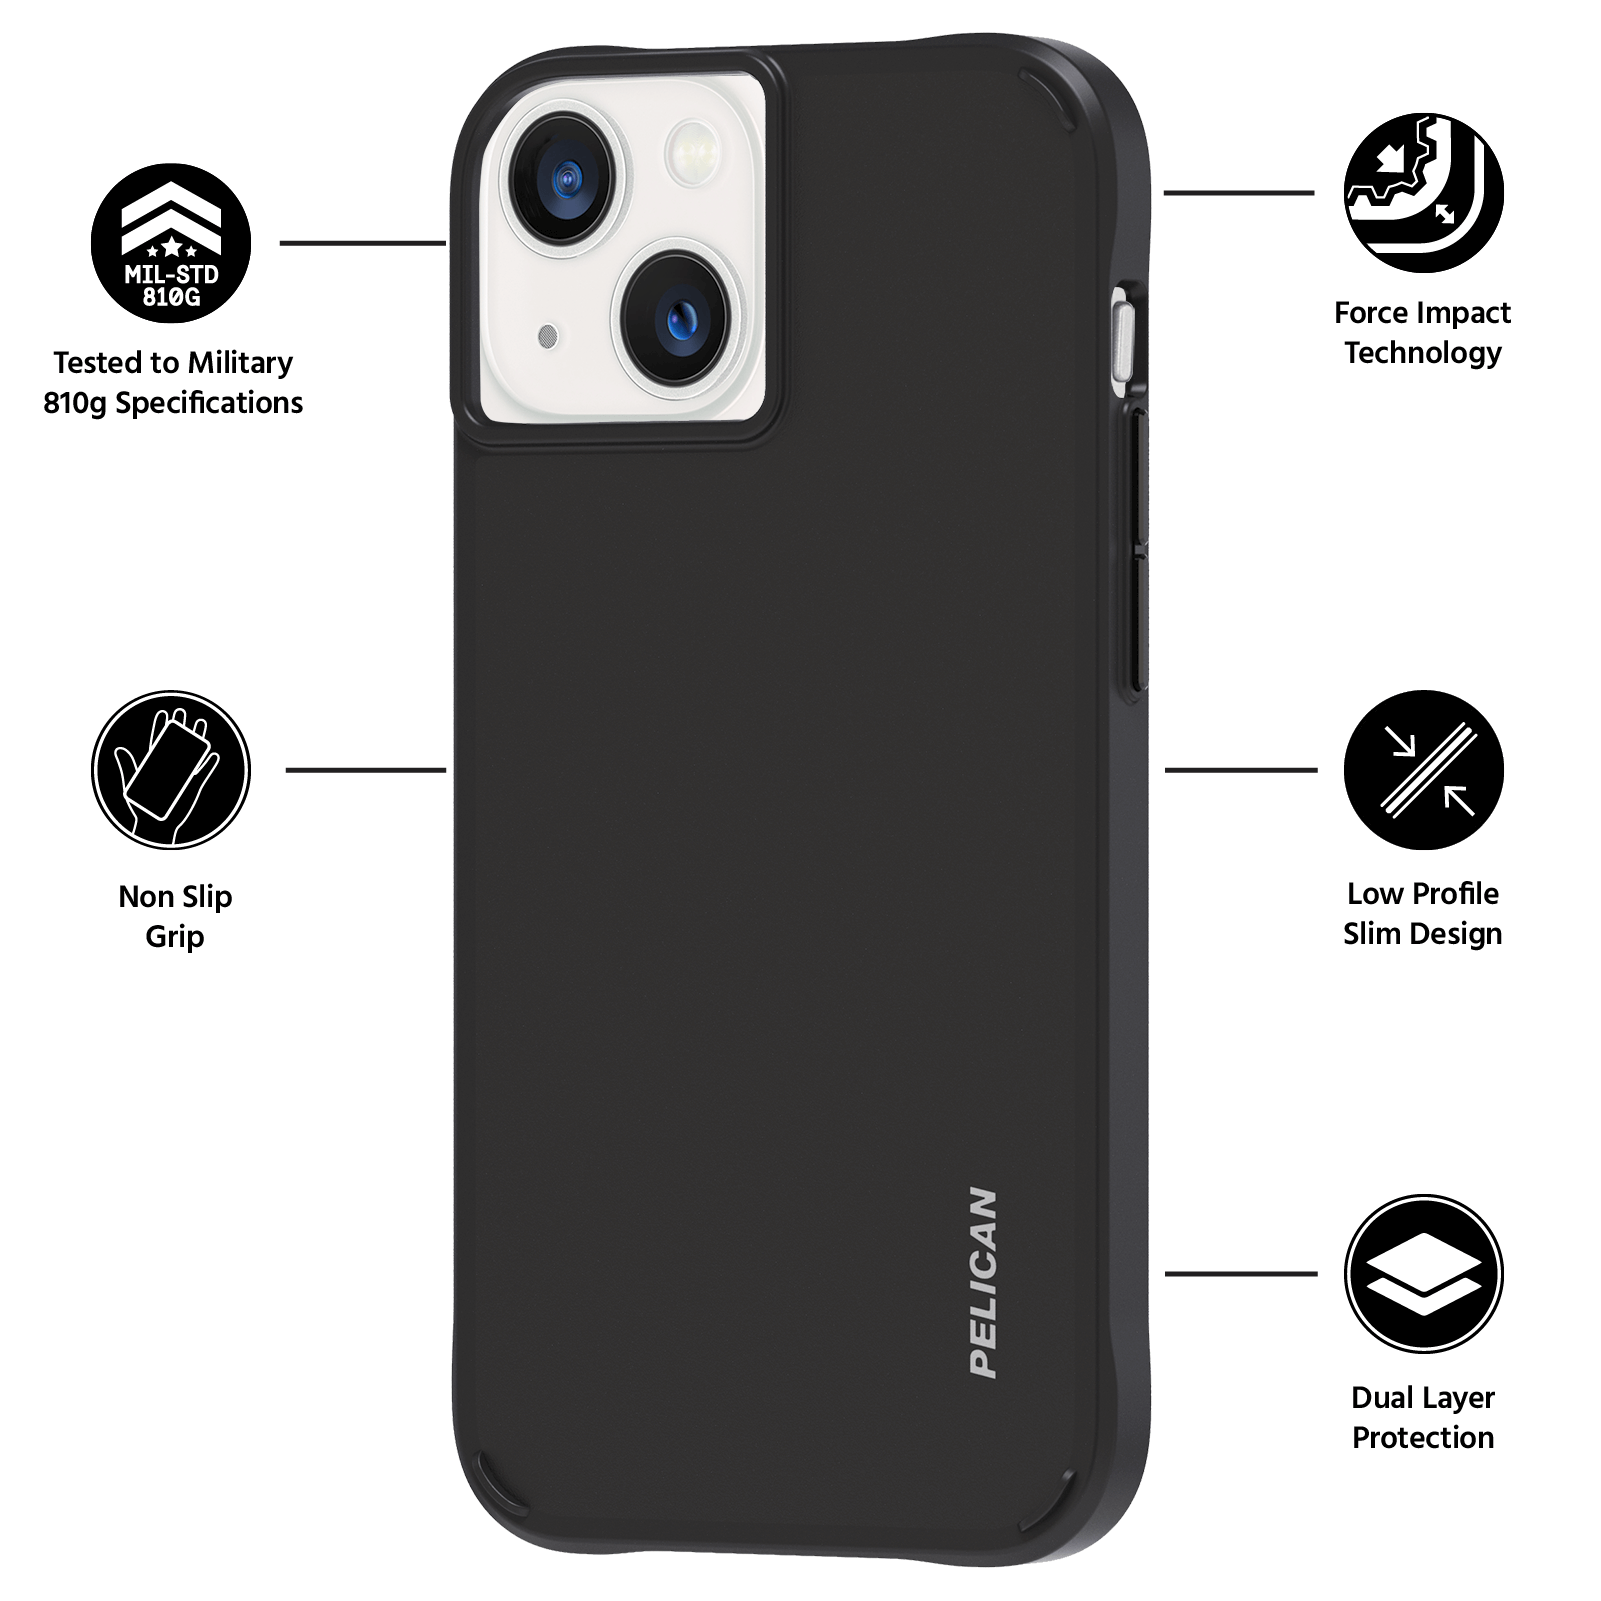 Tested to Military 810g Specifications, Non Slip Grip, Force Impact Technology, Low Profile Slim Design, Dual Layer Protection. color::Black